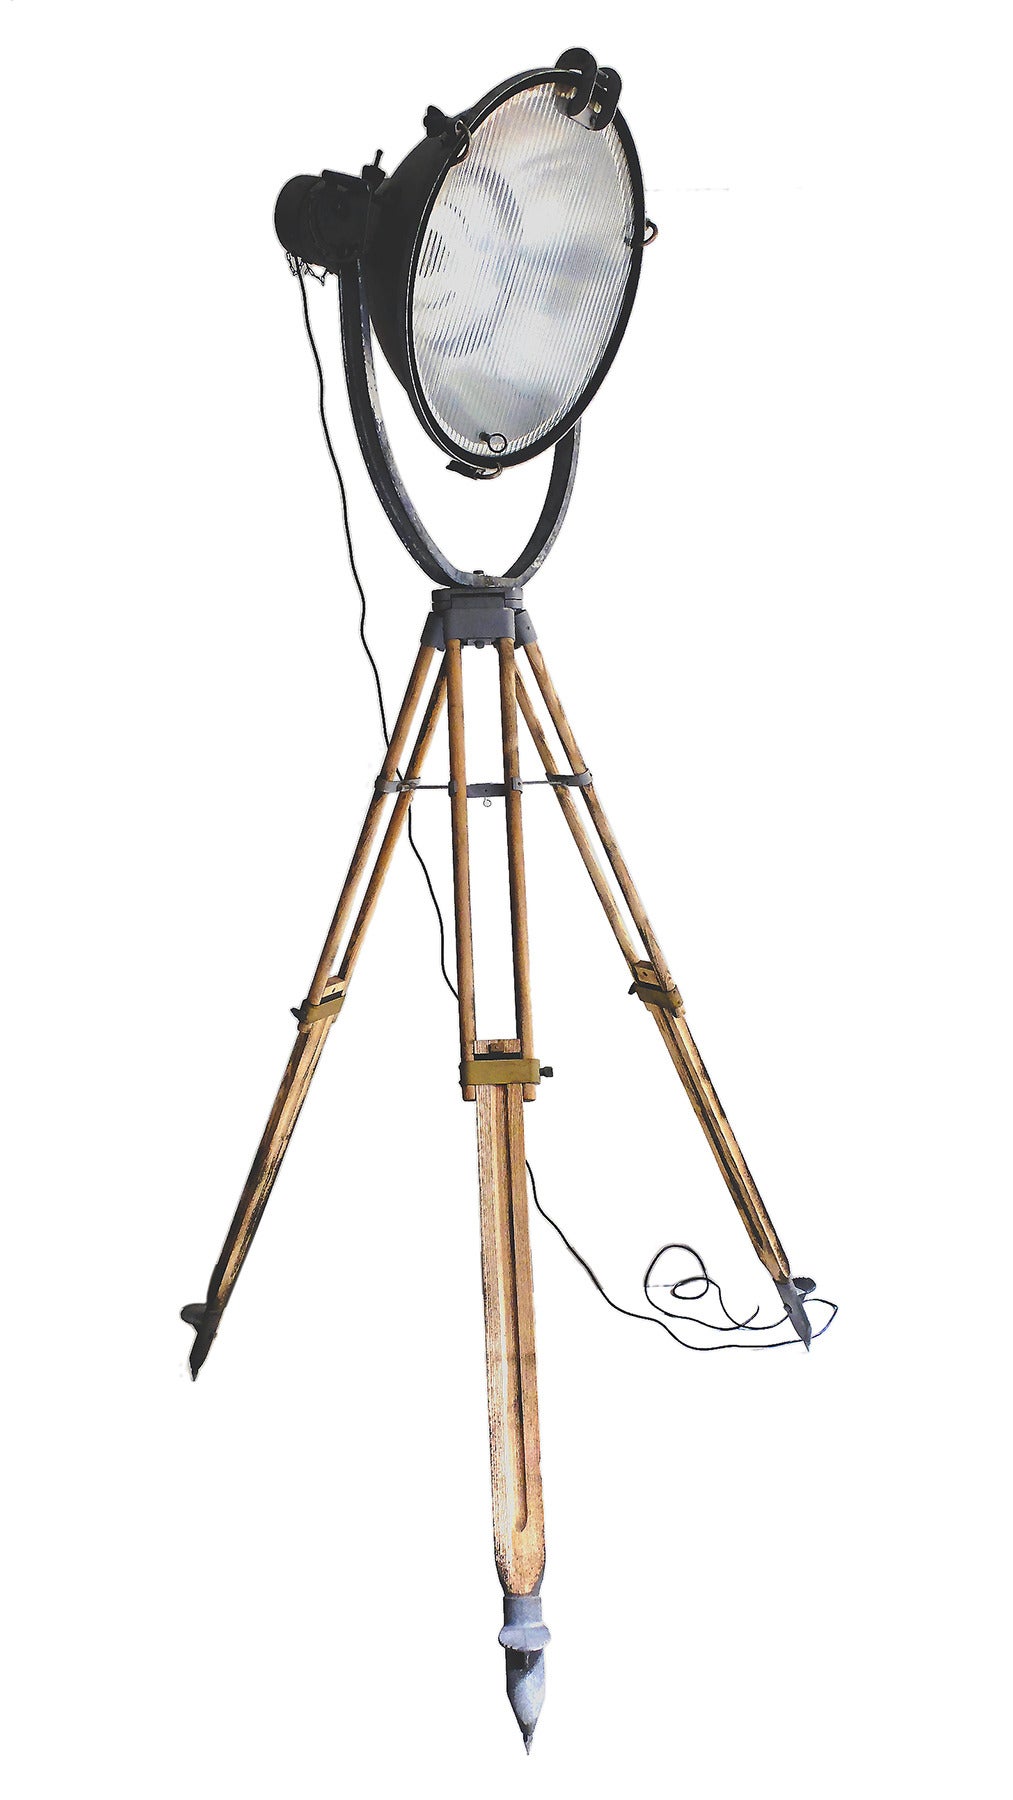 Rare and unusual  Italian painted metal floodlight (projector FS 1500 ) , with adjustable wooden tripod and aluminum feet, used on stage and television. Maker: S.P.A. Rejna Zanardini- Milan.